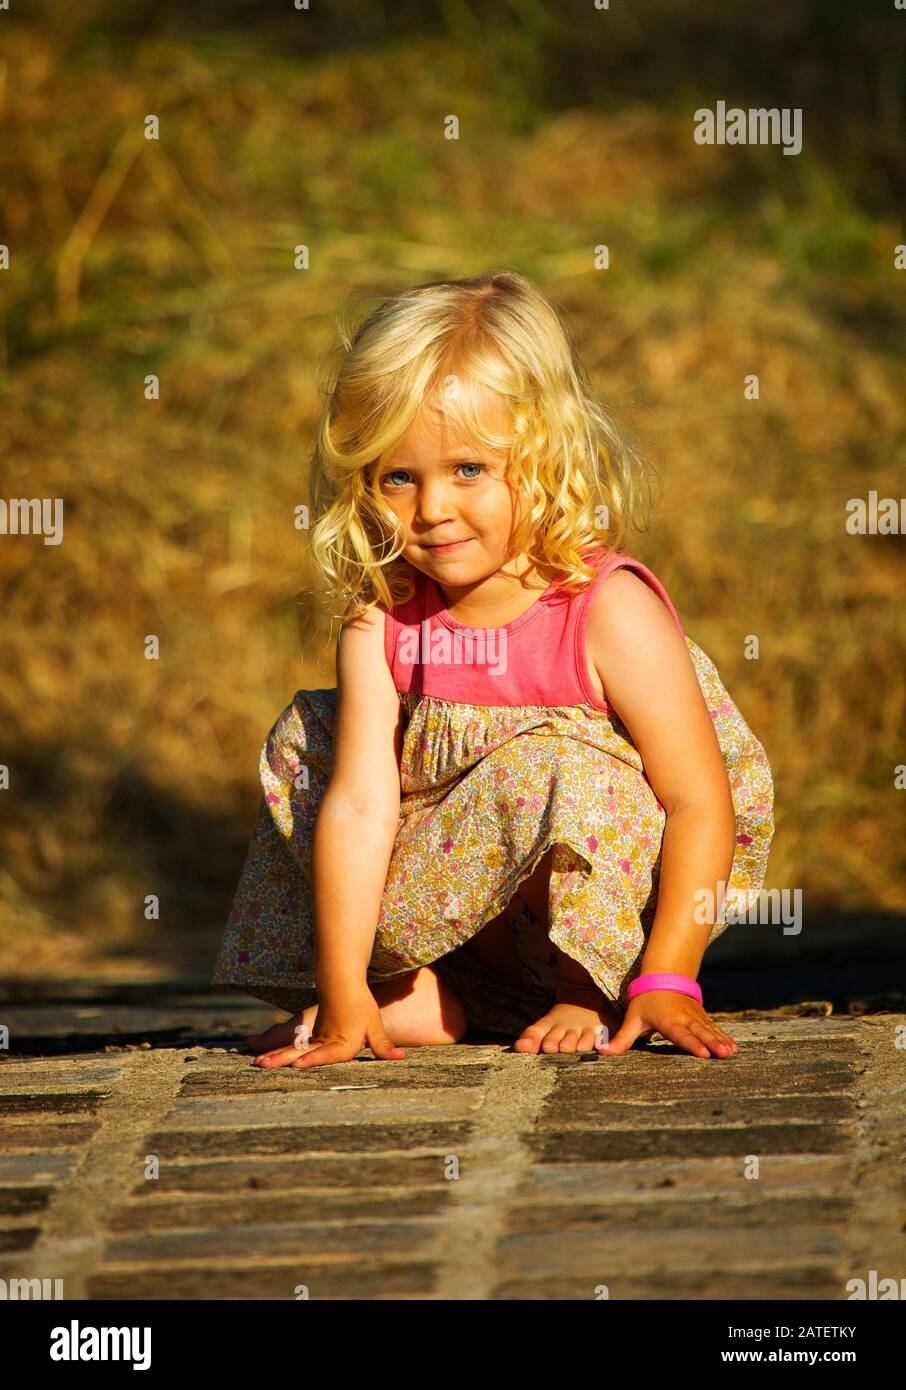 Child portrait of a sweet little blonde girl Stock Photo